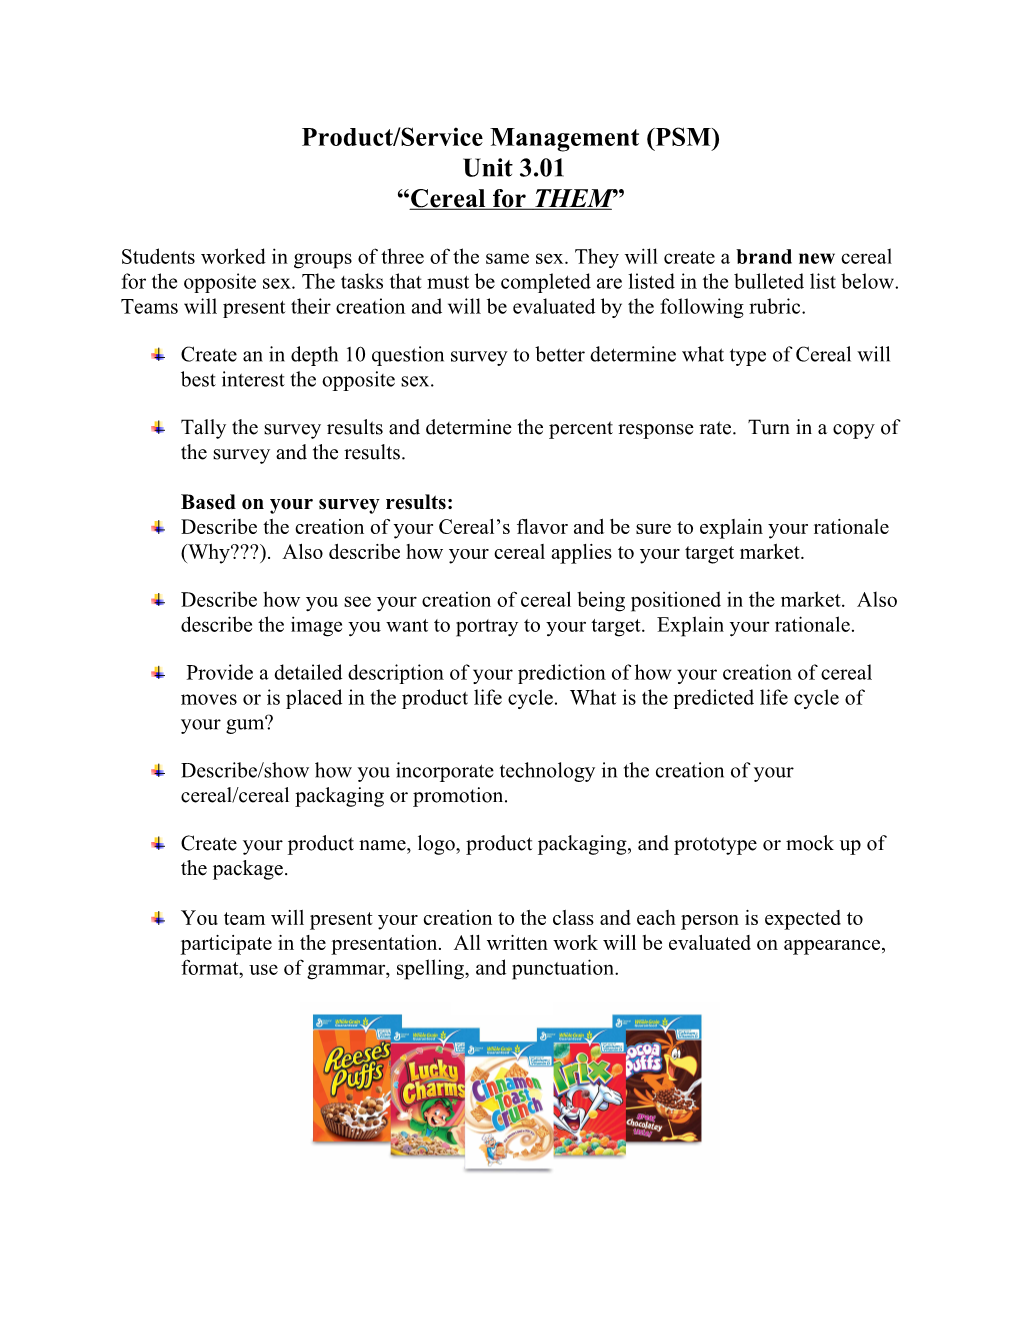 Product/Service Management (PSM) Unit 3.01 Cereal for THEM